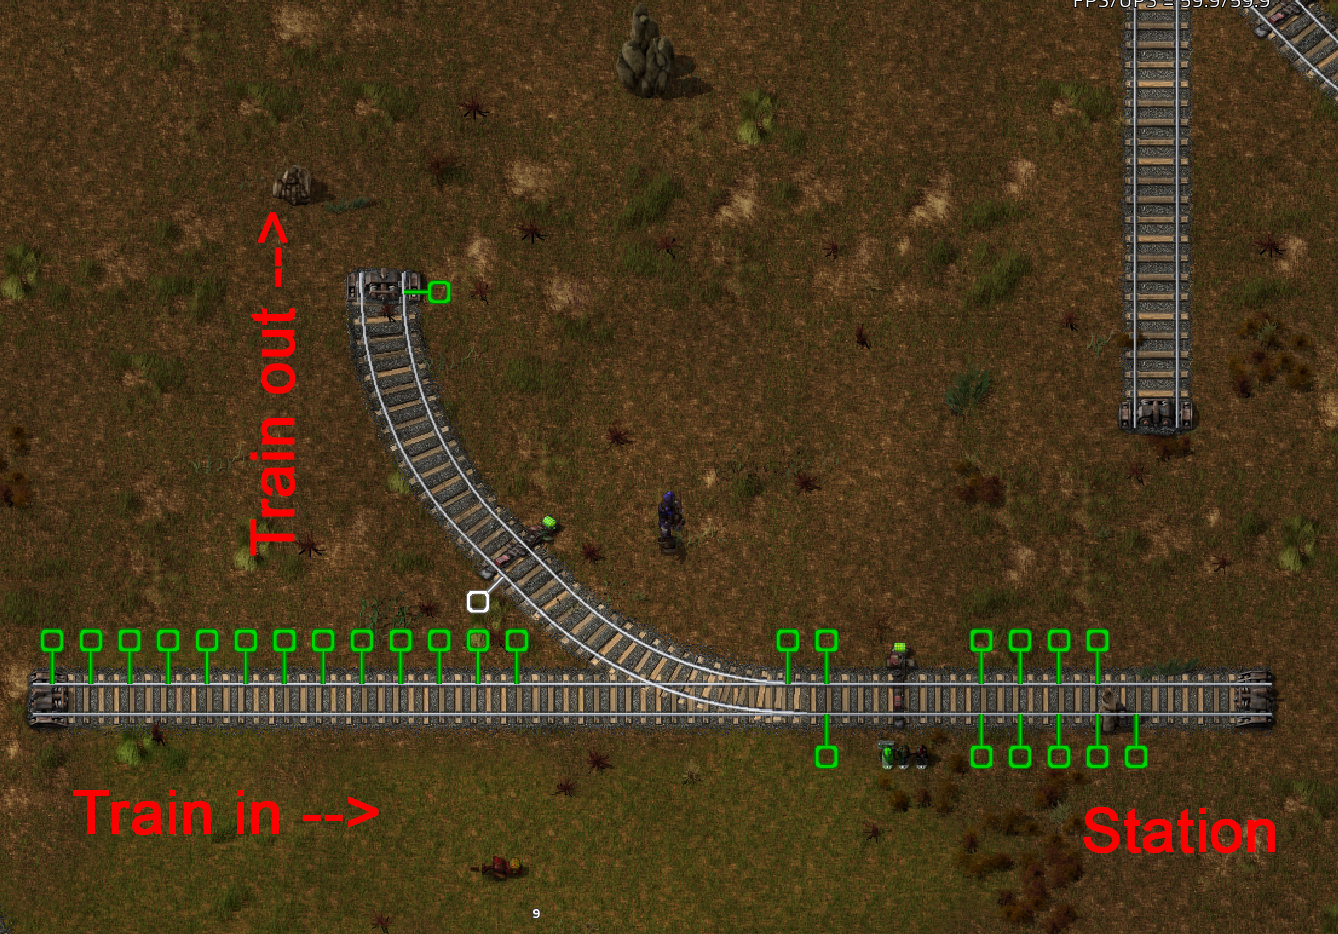 Signal placement impossible